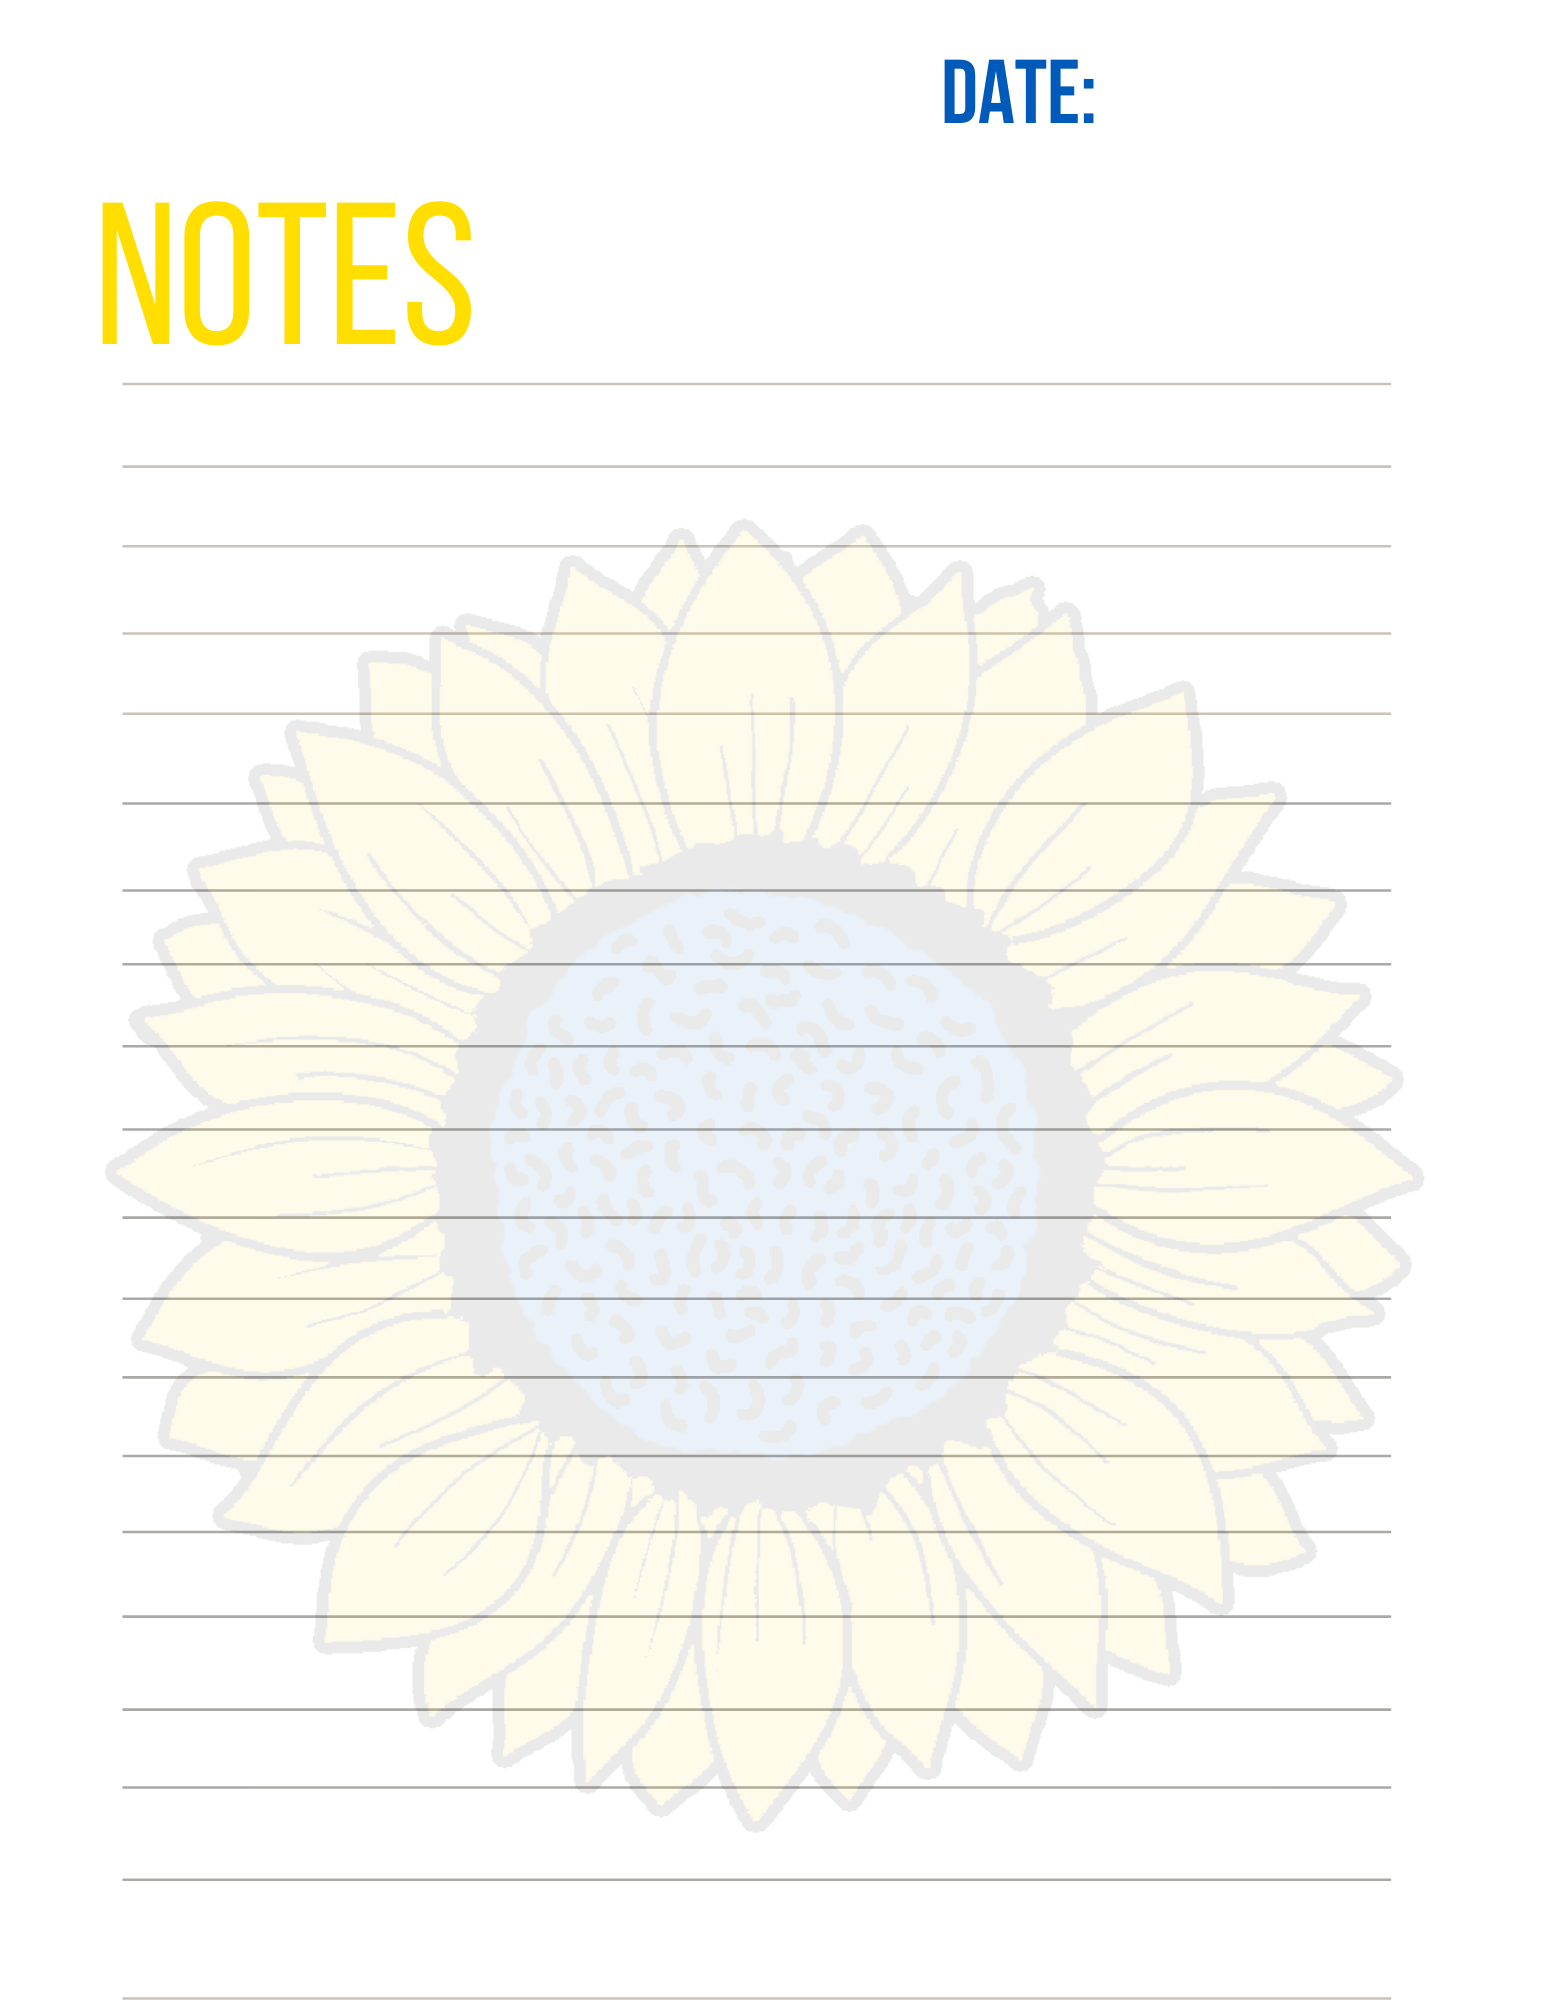 Blue and Yellow Sunflower Notes Sheet-Calendars, Organizers & Planners-5.25 Designs-5.25designs-veteran-family business-florida-melbourne-orlando-knit-crochet-small business-